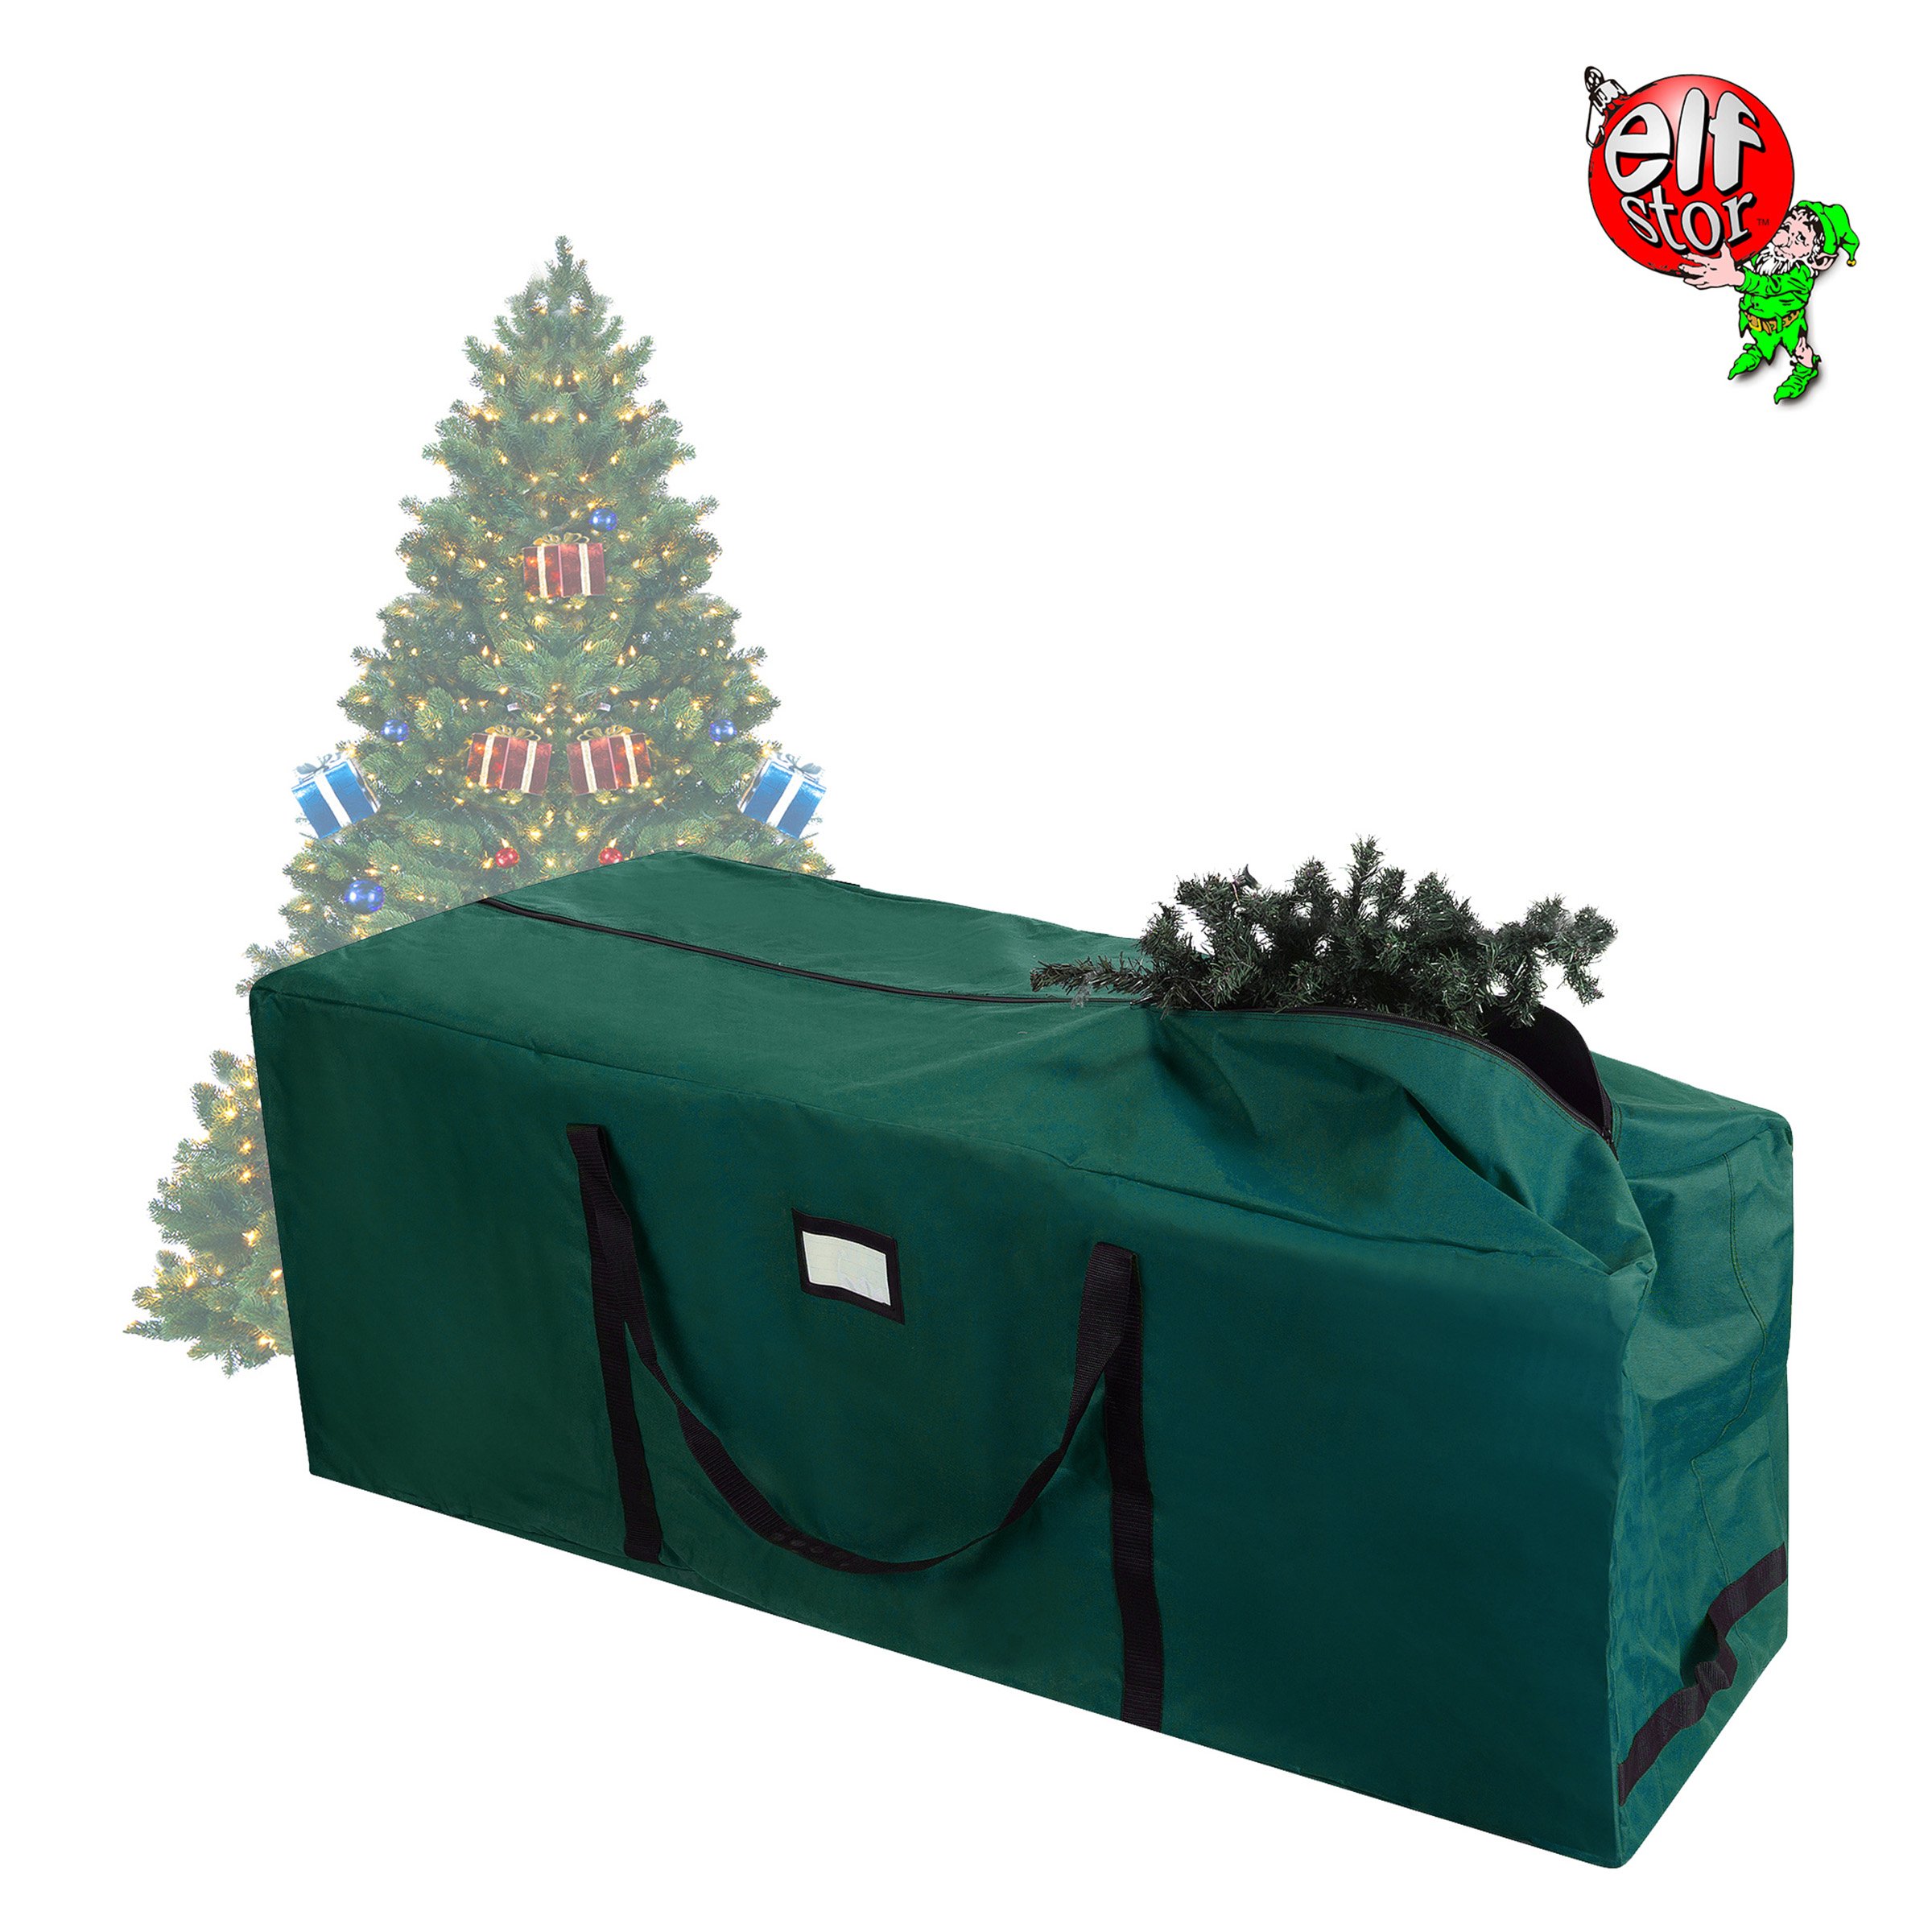 Christmas Tree Storage Bag On Wheels Fits Up To 12 Foot Disassembled Tree Rolling Duffel Bag - Green